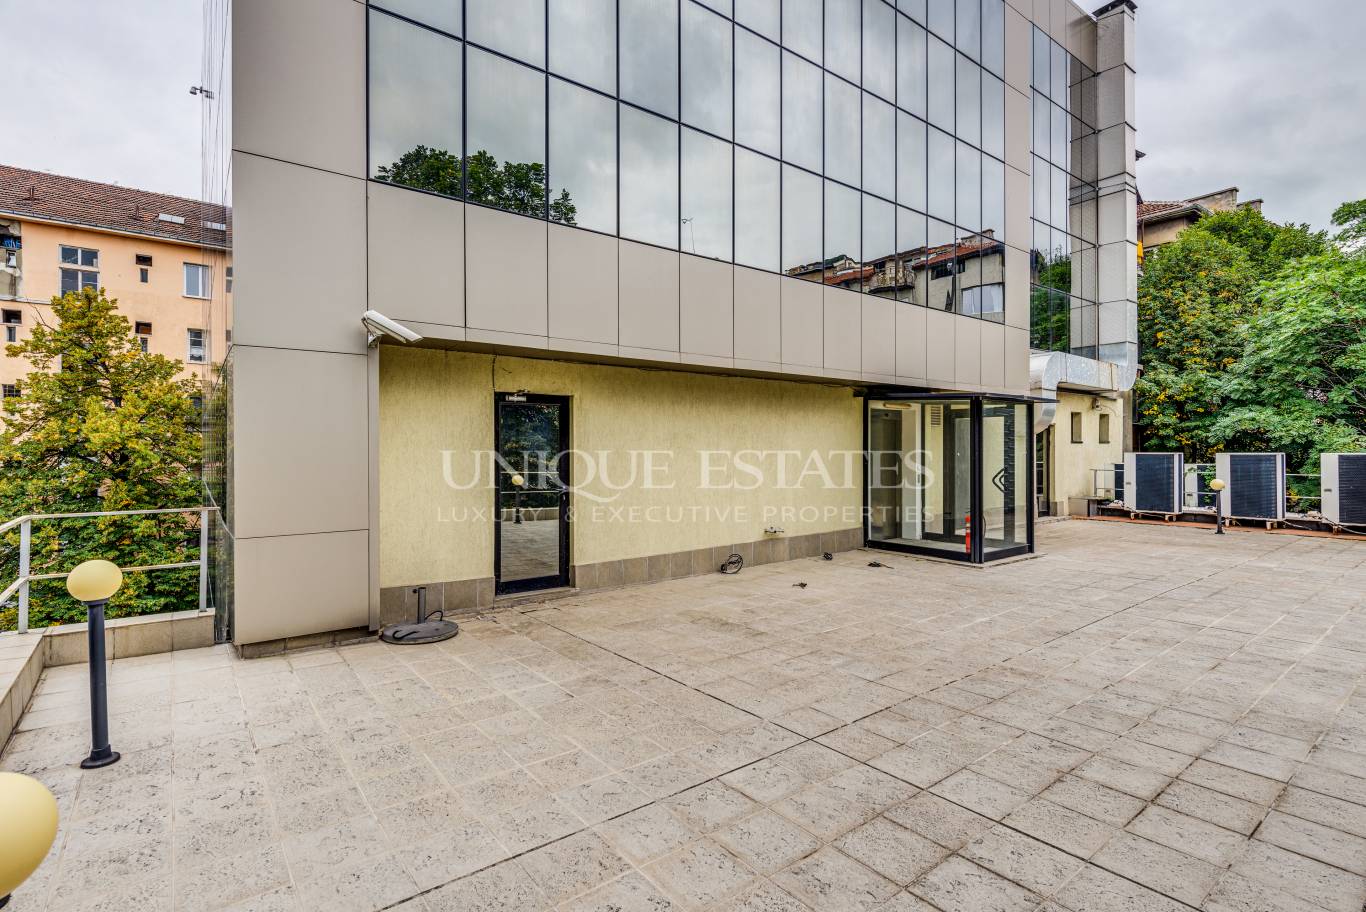 Office for rent in Sofia, Downtown with listing ID: K13585 - image 5